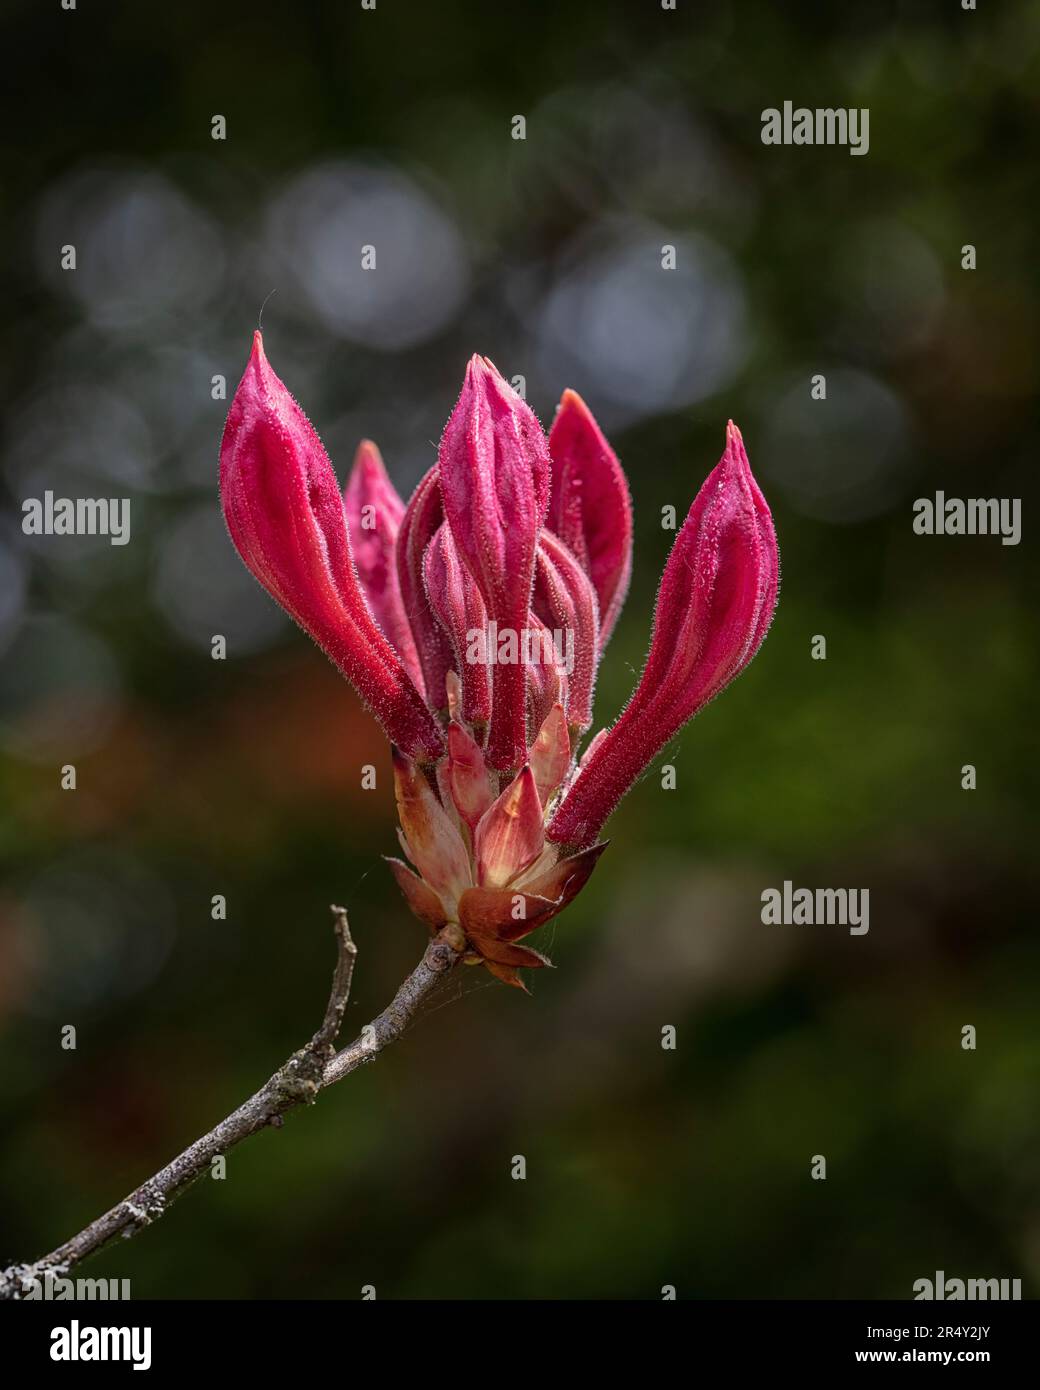 Rhododendron 'Pucella' (syn. Fanny) Stock Photo